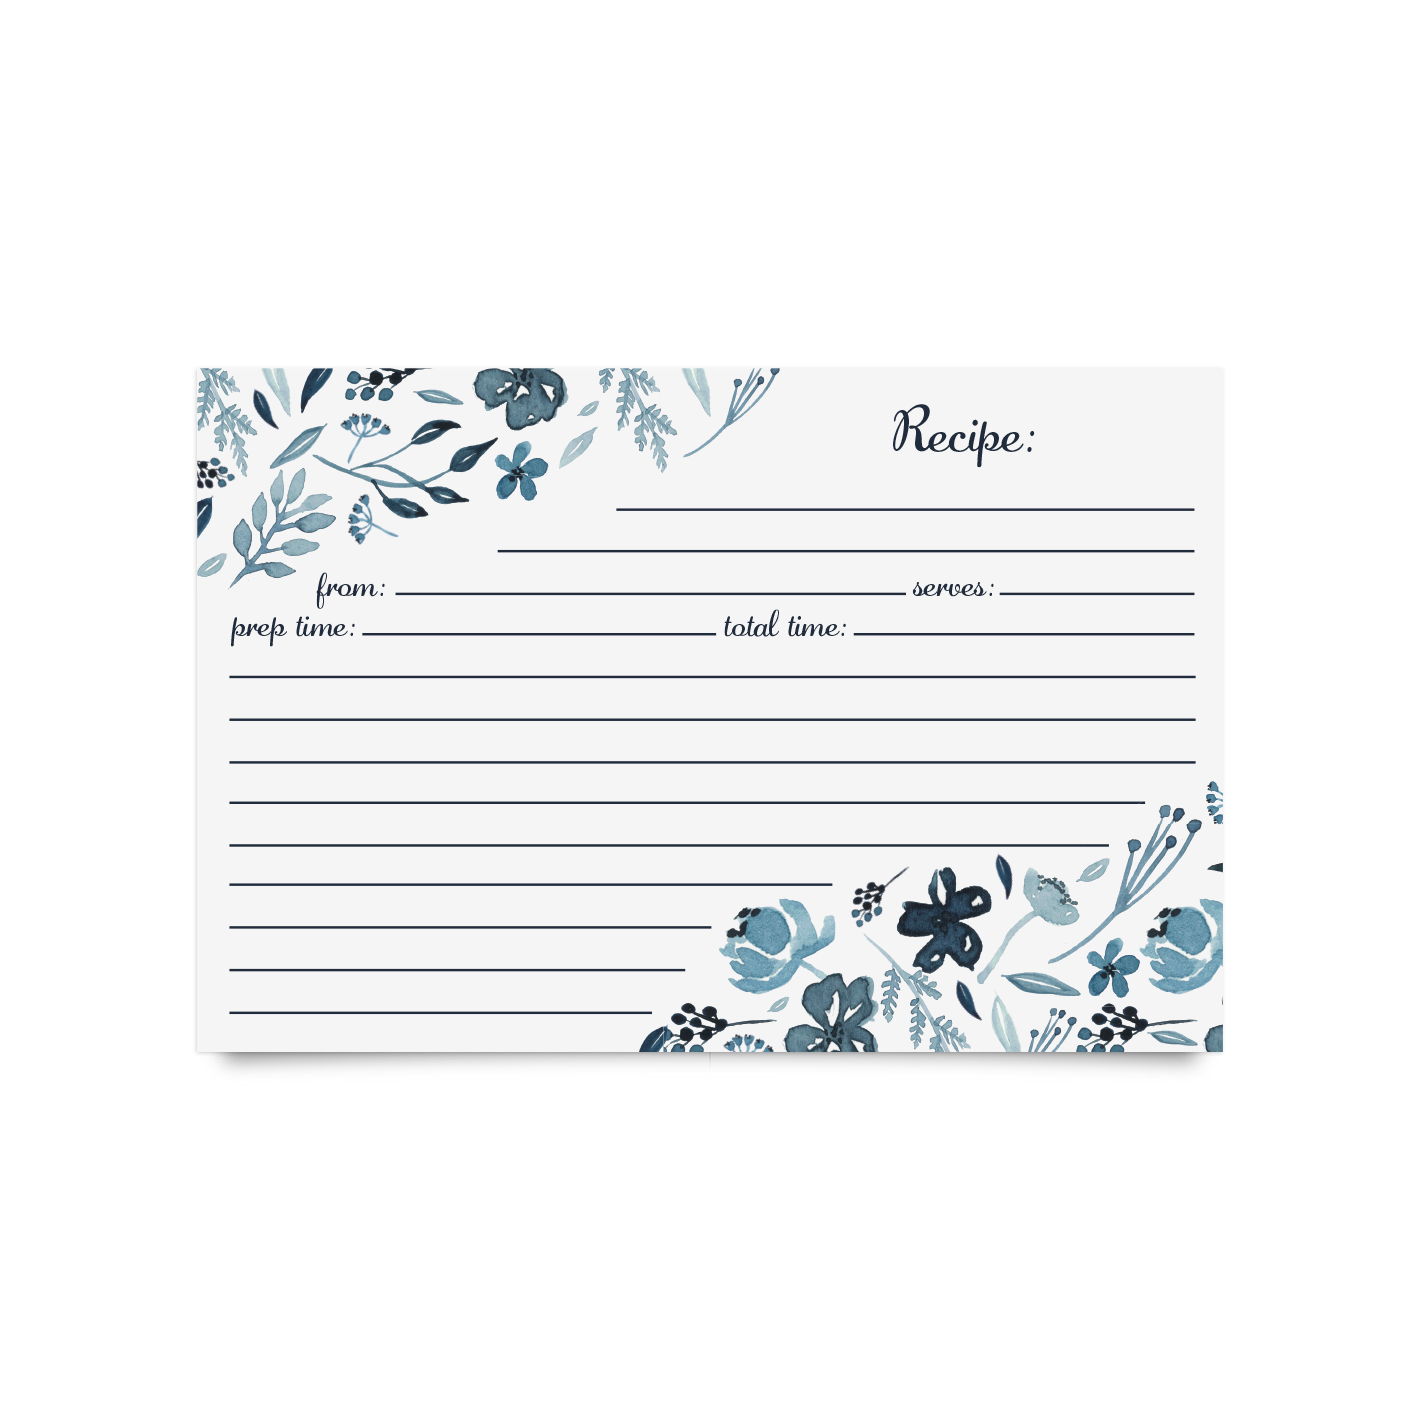 Design Your Own Postcard 4 x 6 (Pack of 50) – Jot & Mark